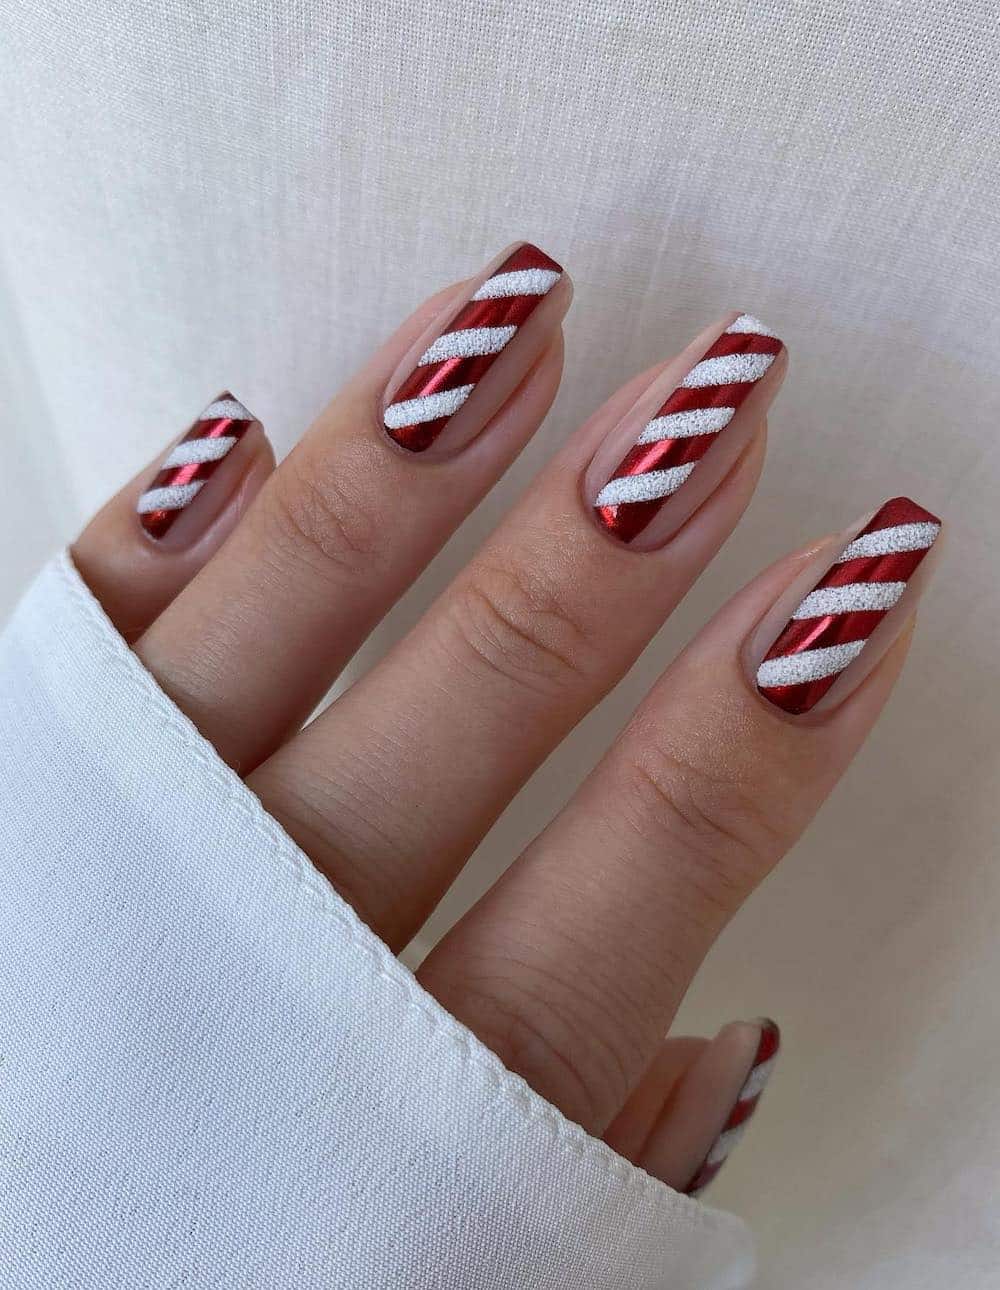 Red and white candy cane manicure with white glitter.